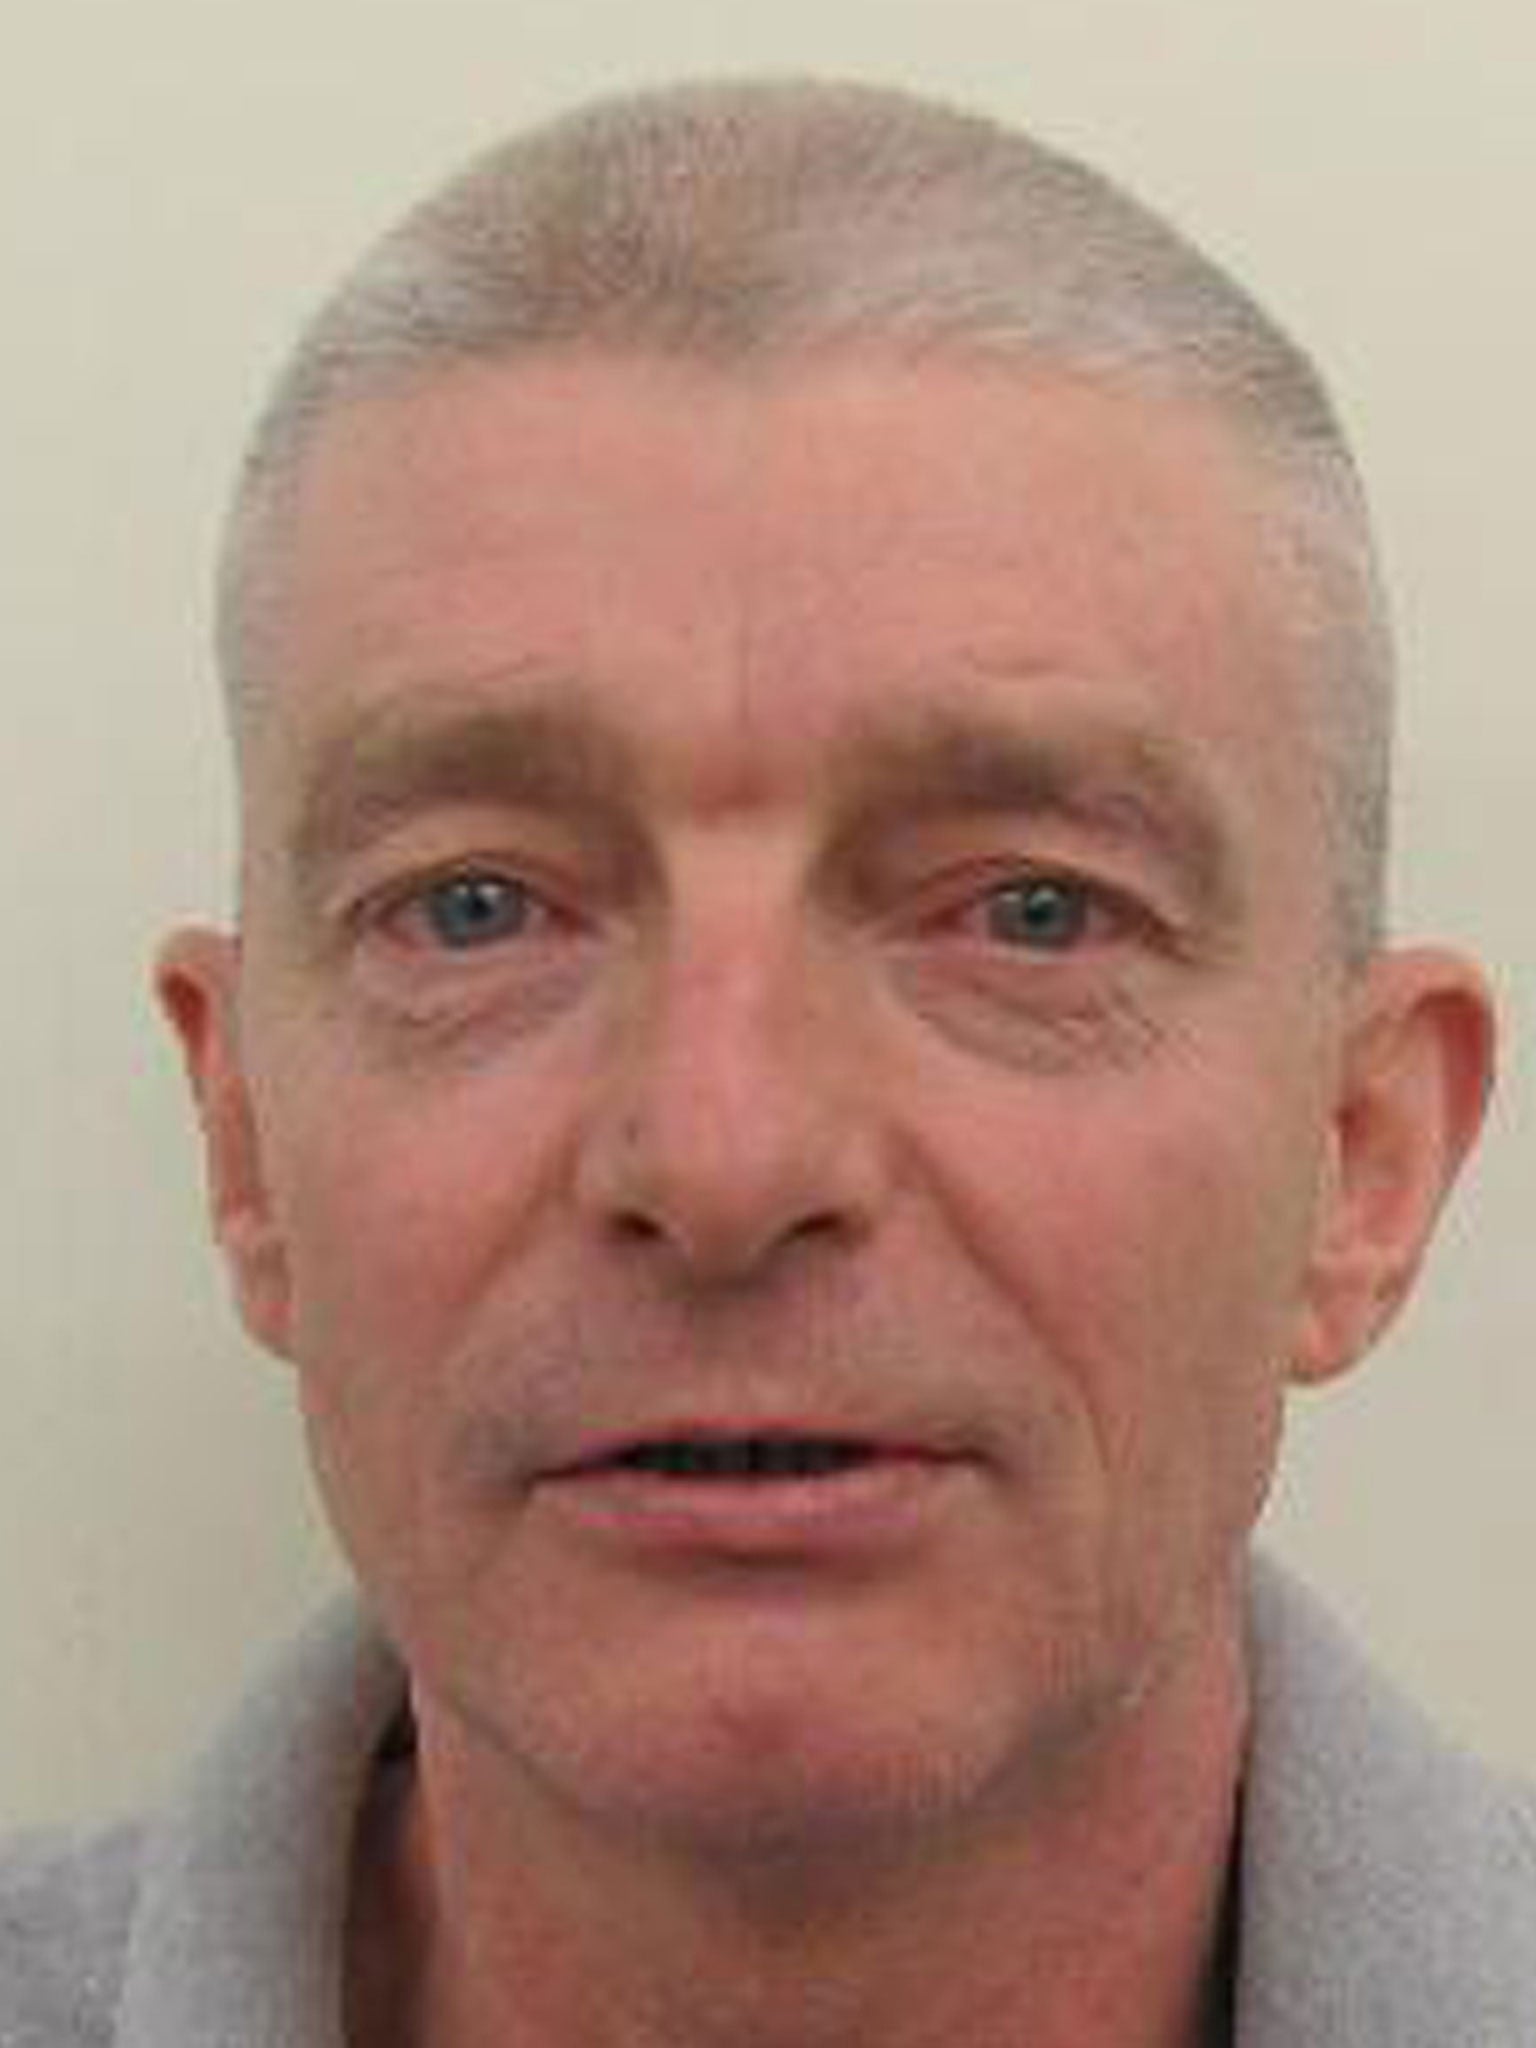 Ian John McLoughlin, who is being sought for the stabbing, is believed to have recently come out of prison